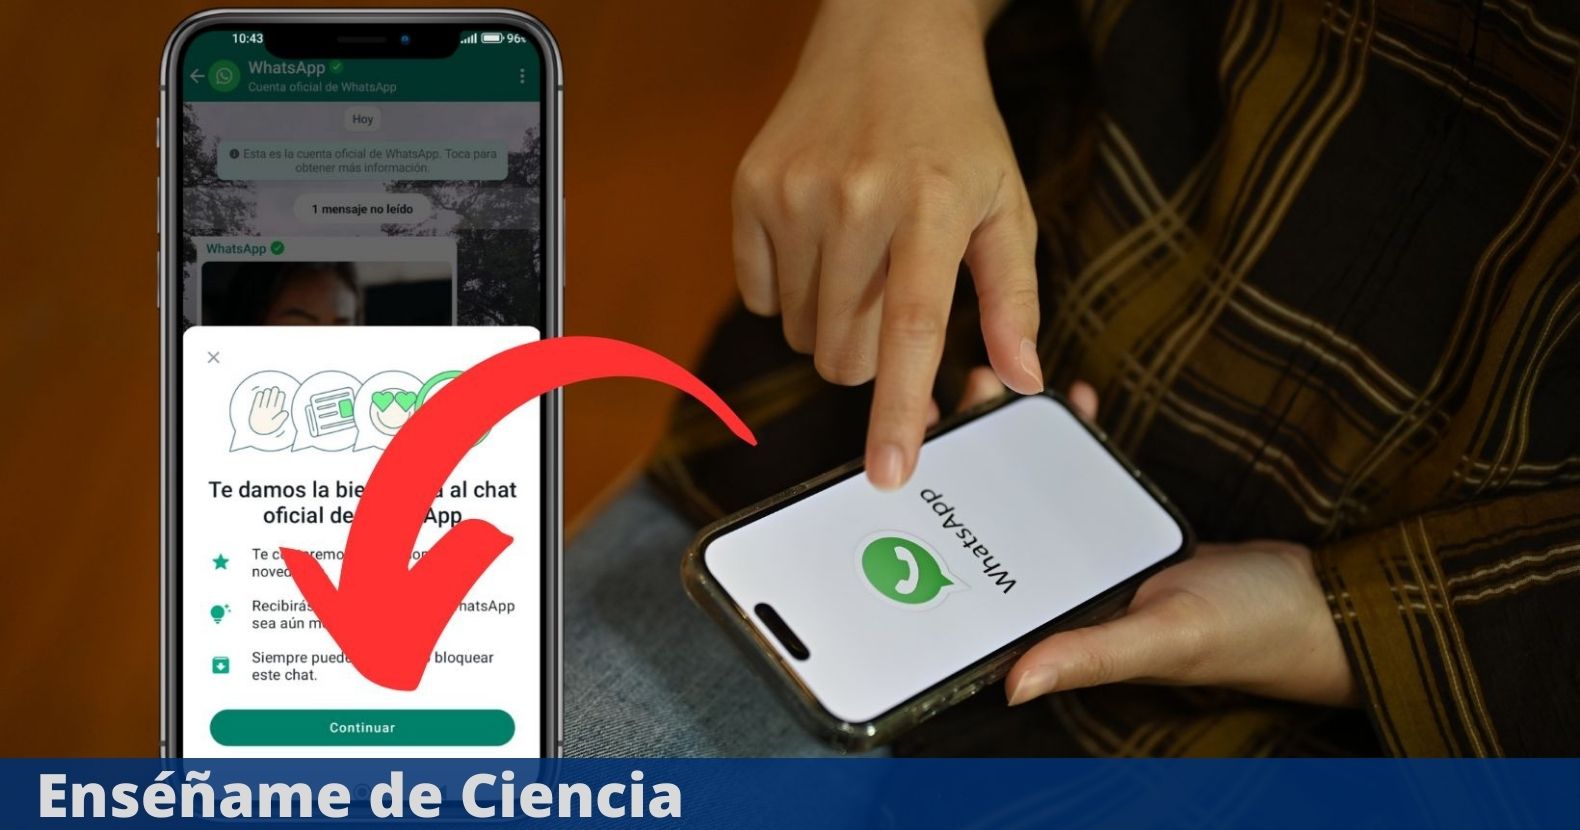 What is it about and what is the new WhatsApp chat that mysteriously appeared – Enseñame de Ciencia